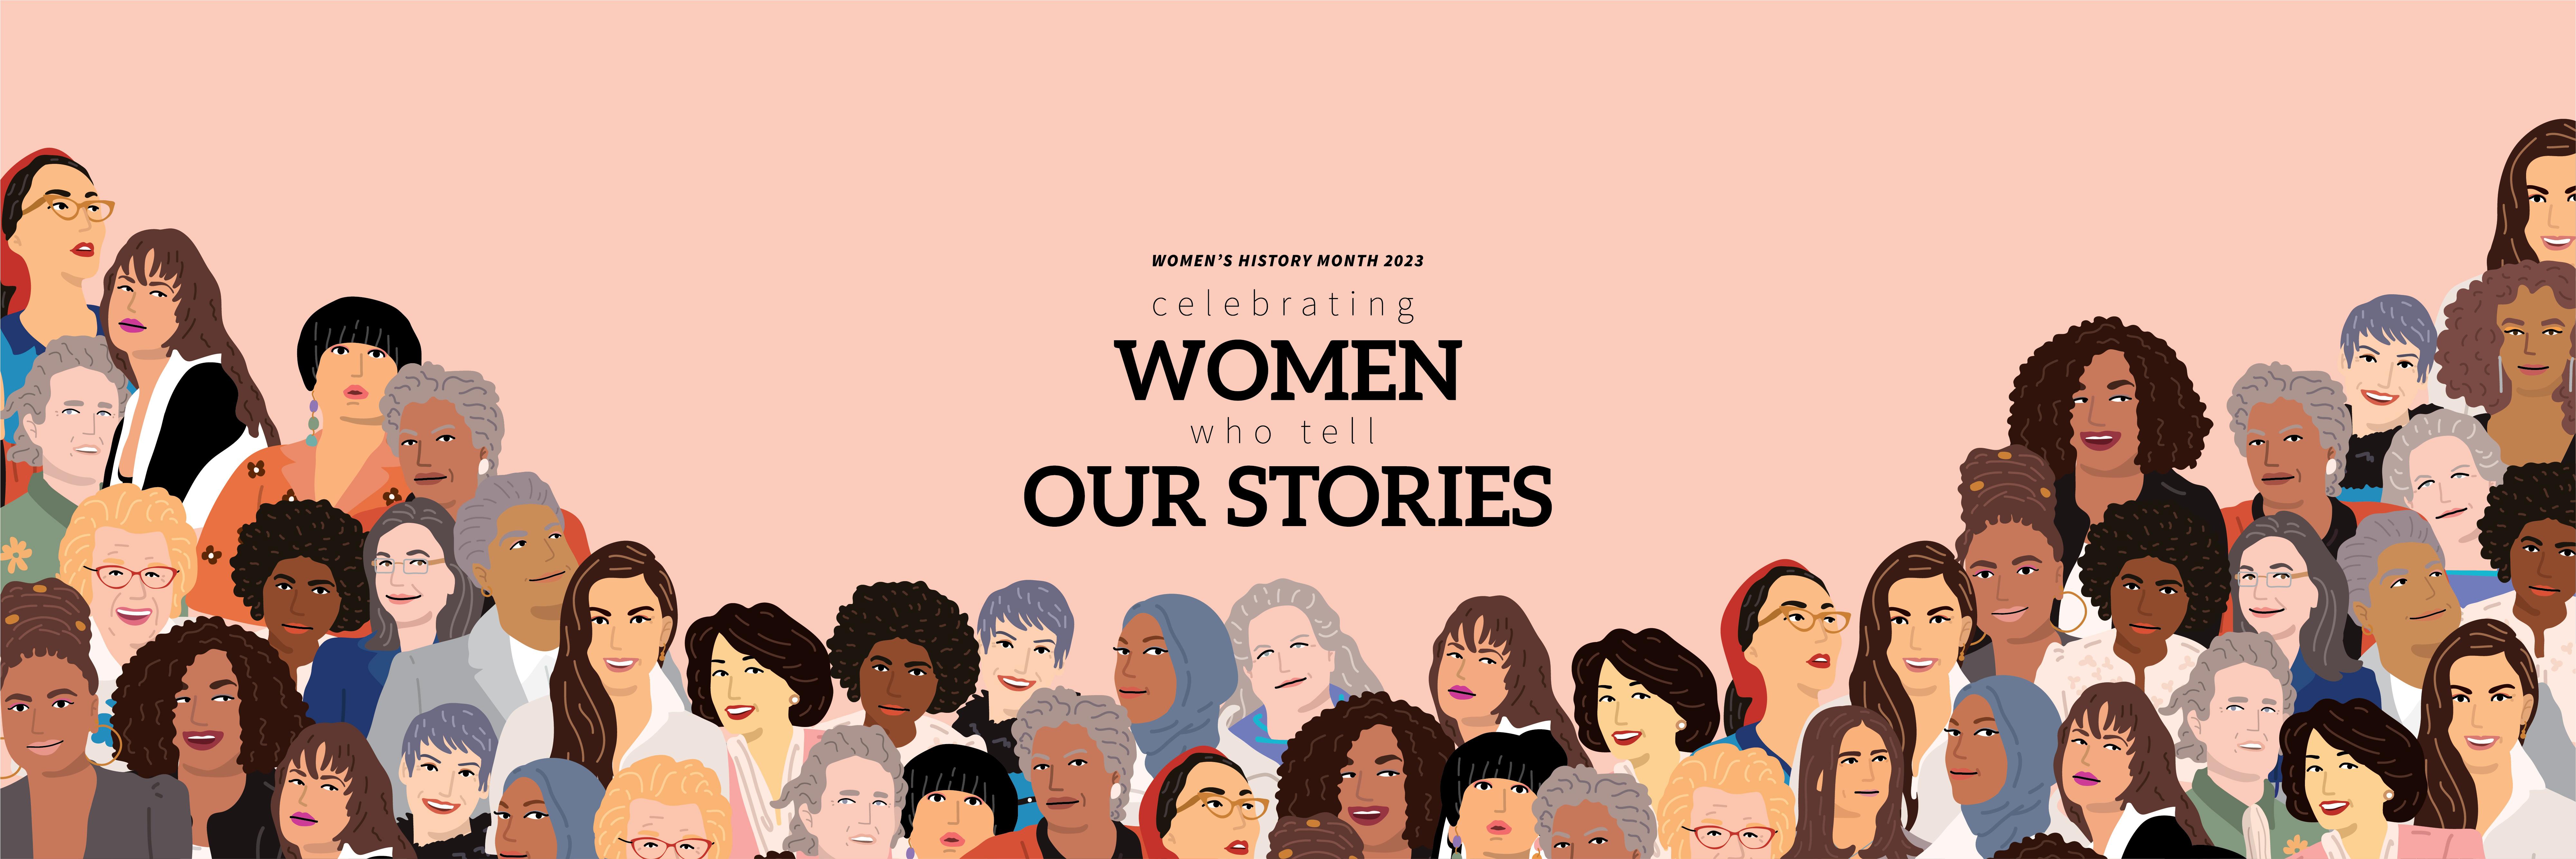 Peach background with caricatures of notable women figures grouped together from left to right across the bottom with the text "women's history month 2023 - women who tell our stories" in black print in the center